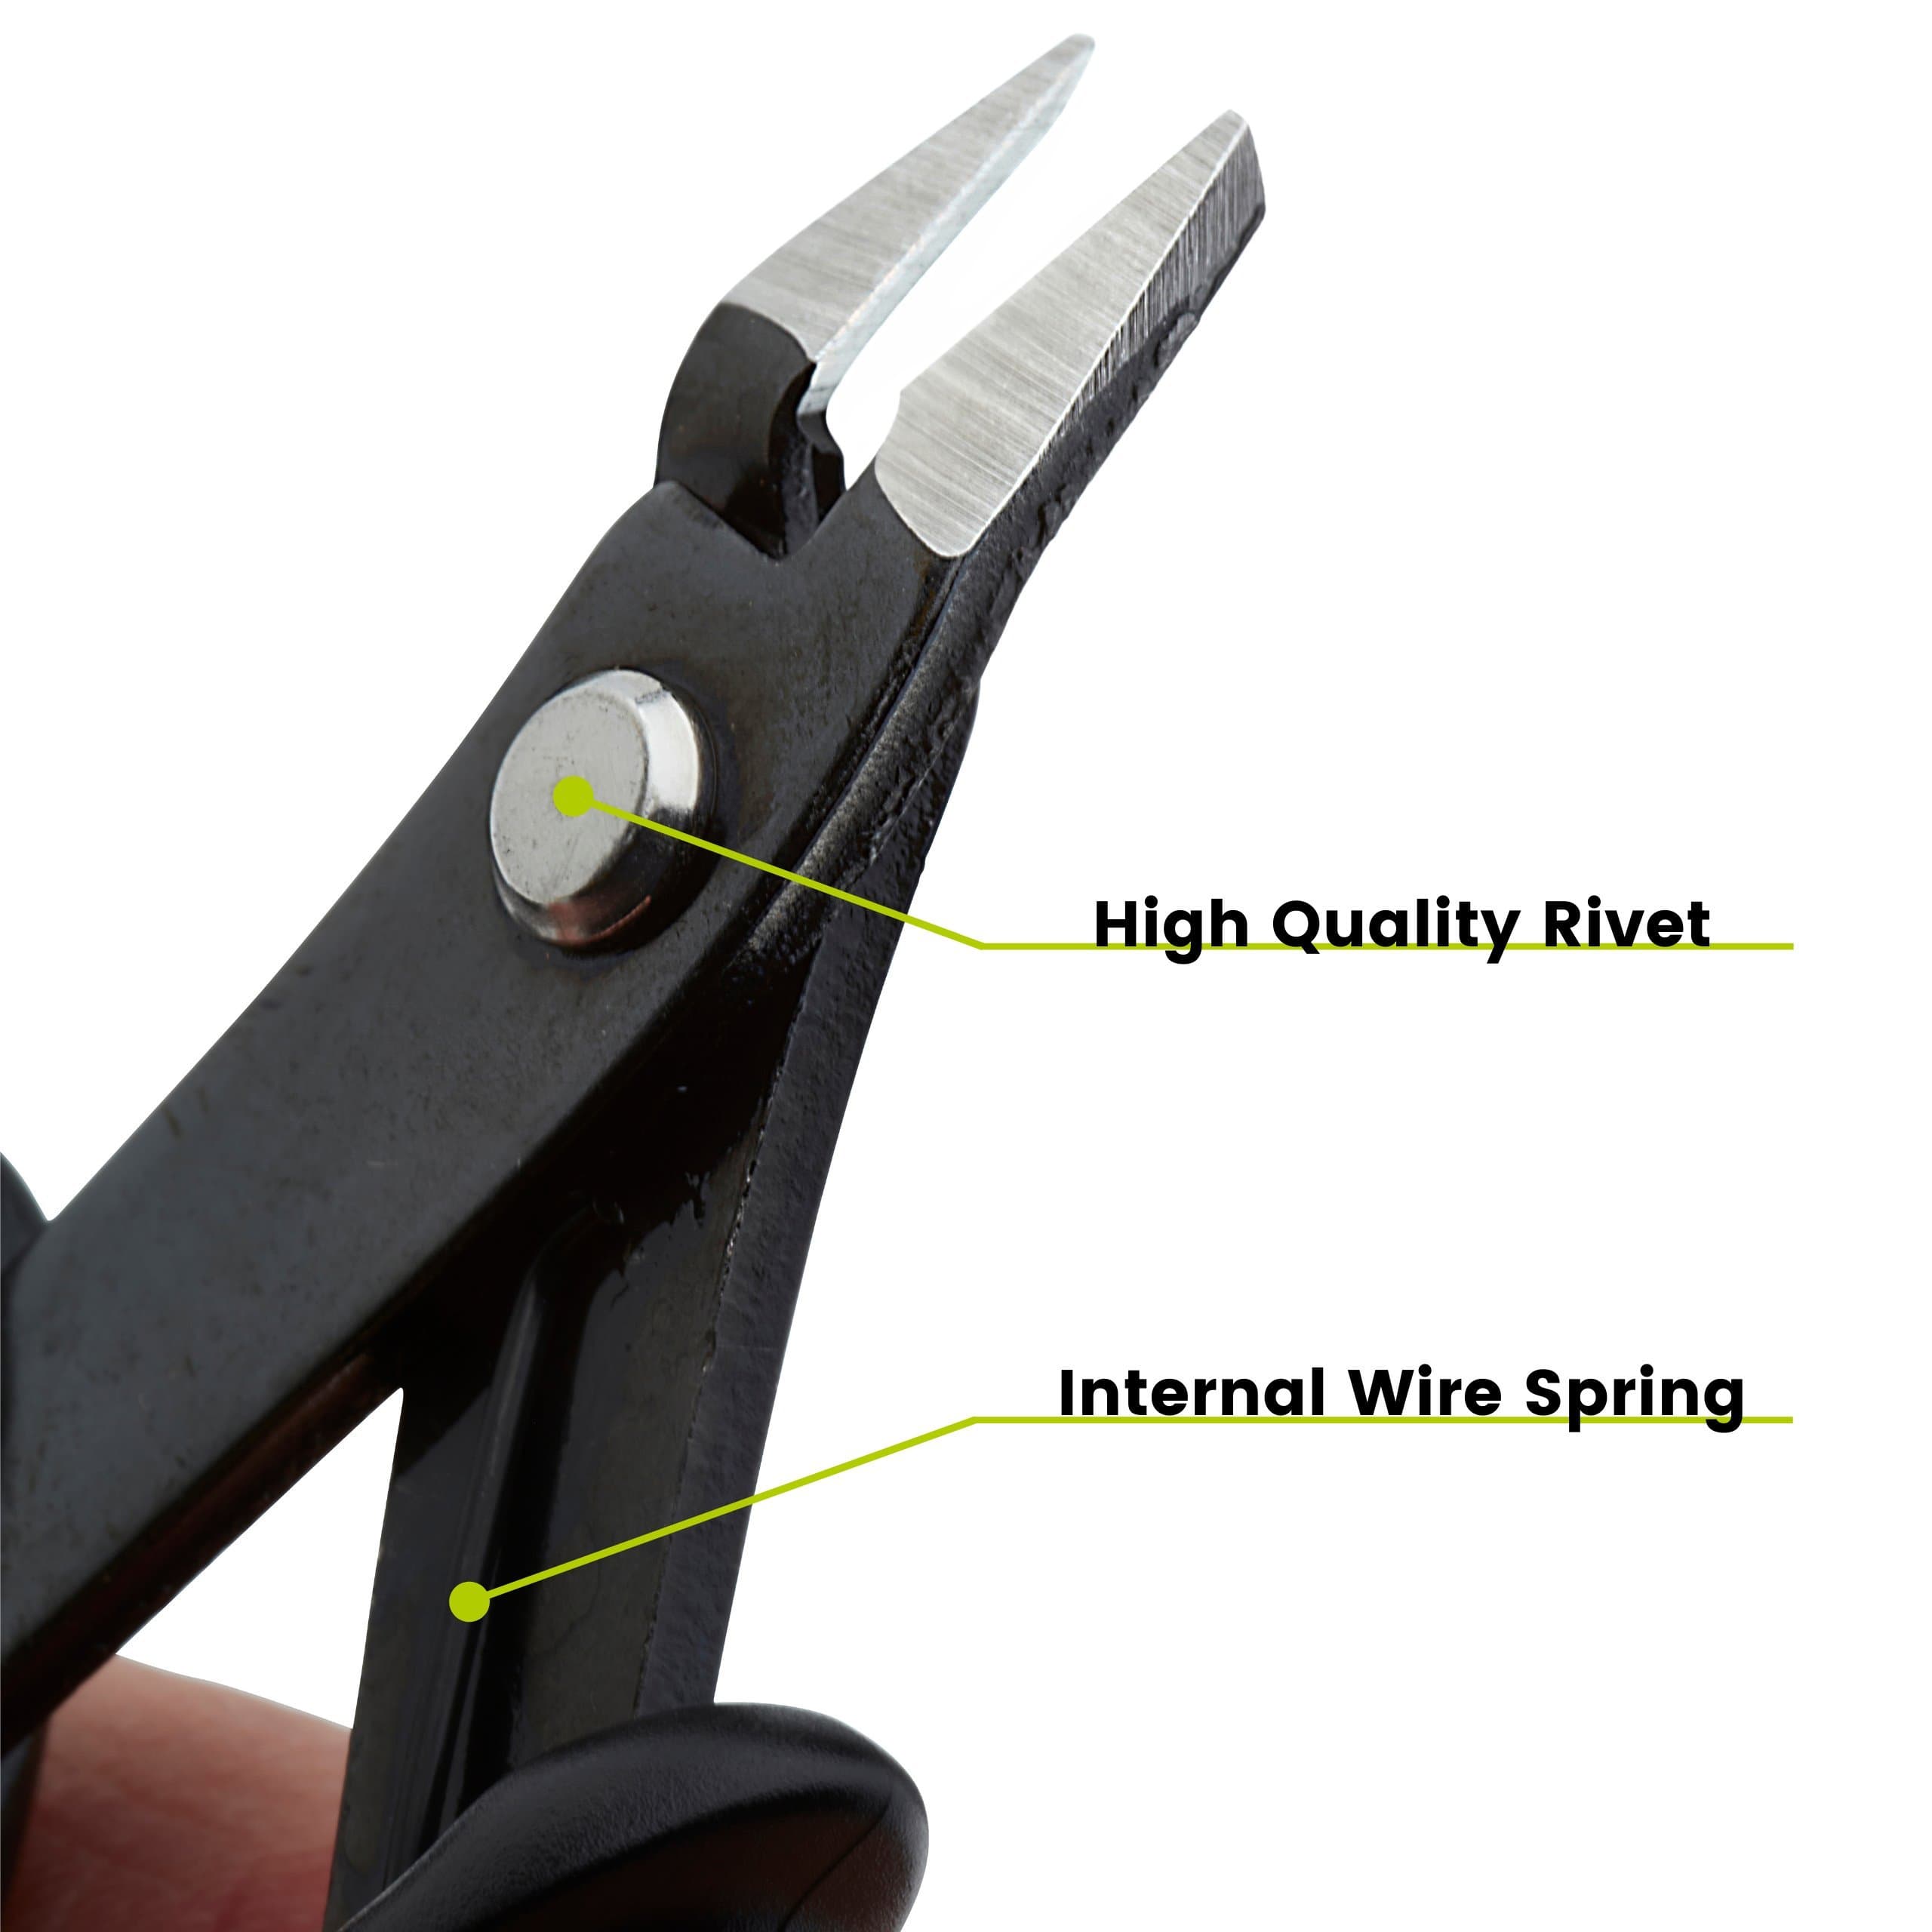 Taking care of jewelry wire cuttters